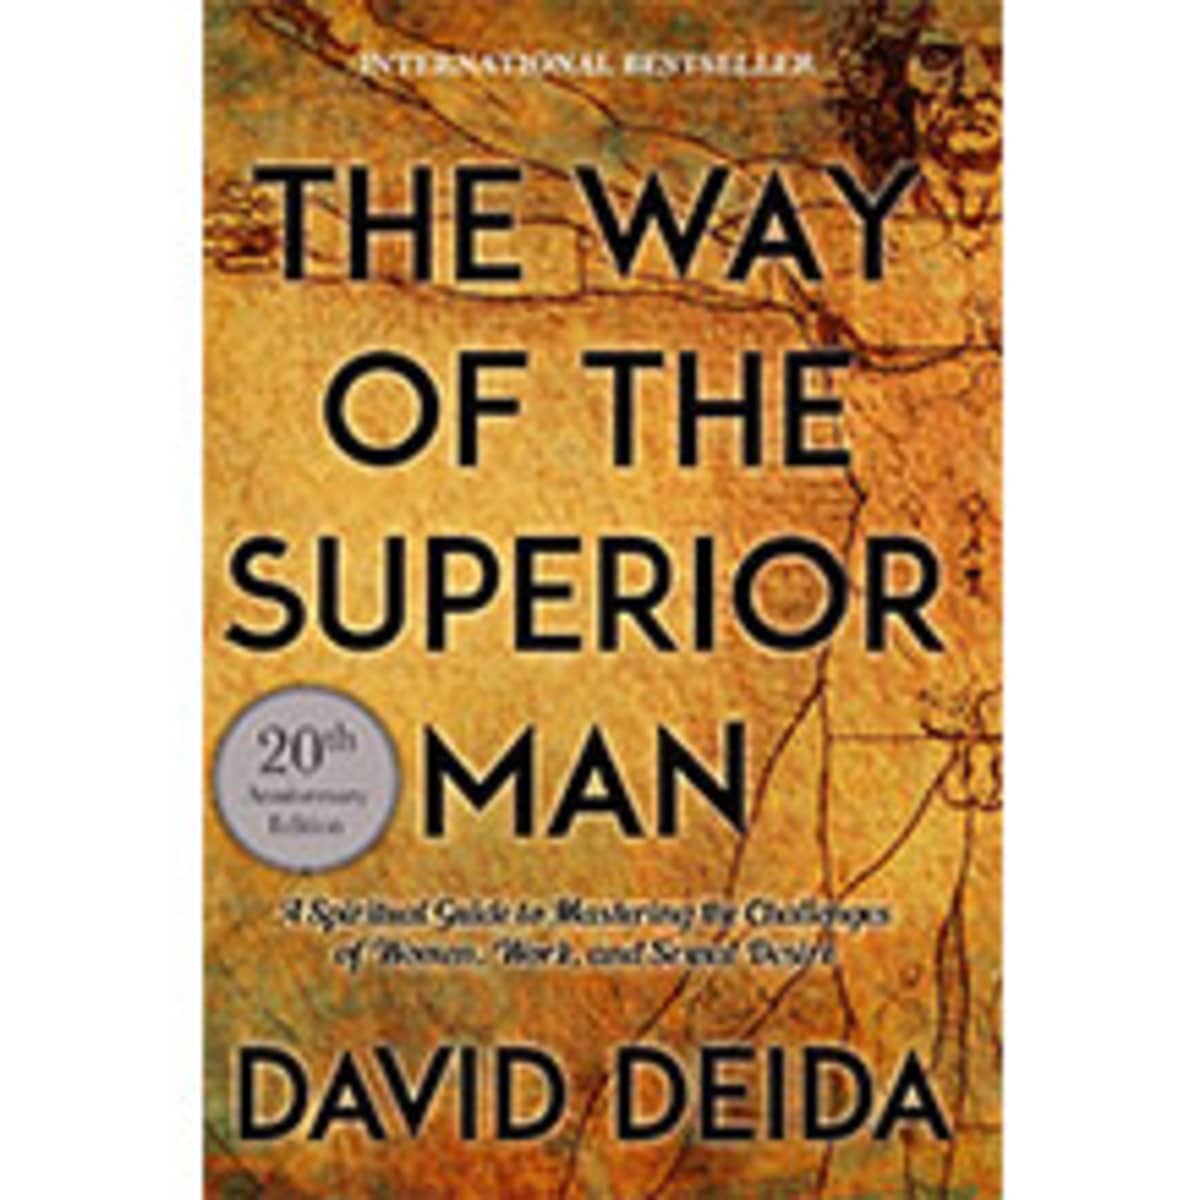 Why read The Way of the Superior Man?